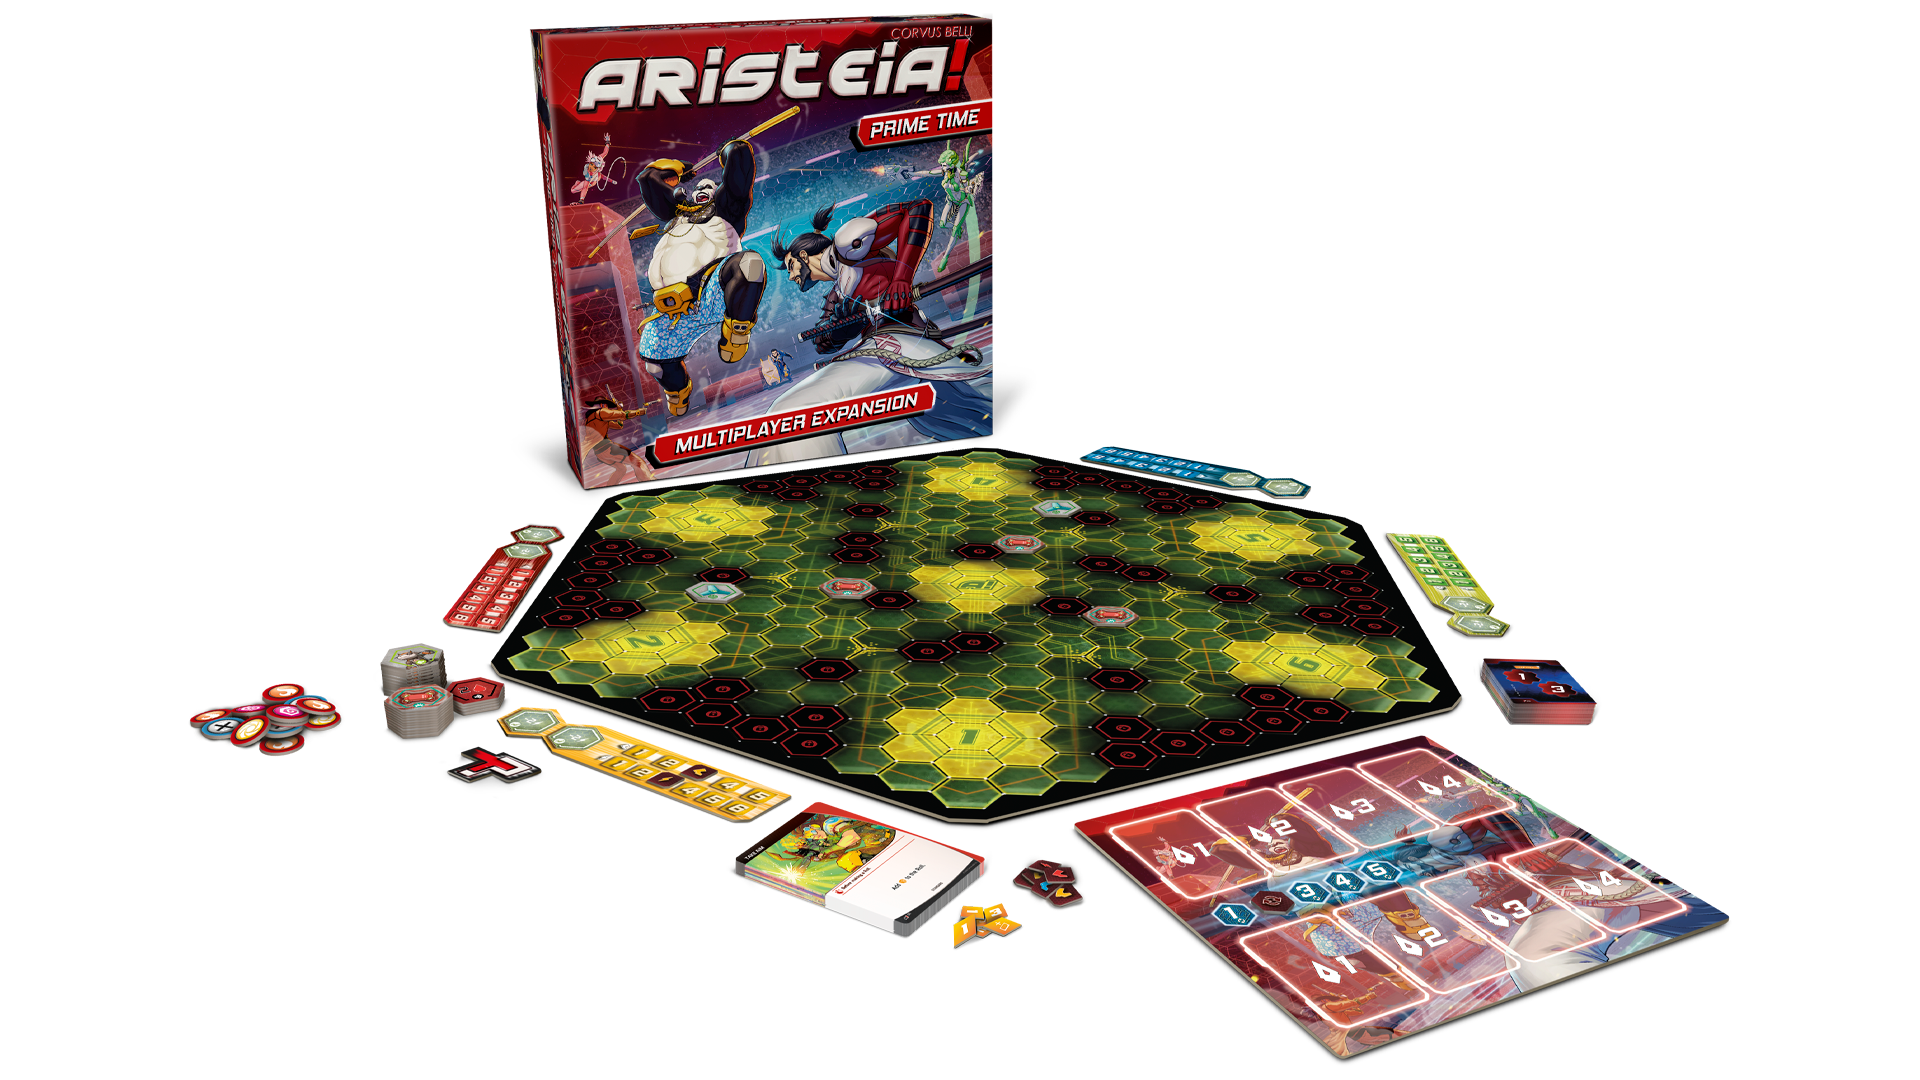 Image for Infinity sports game spin-off Aristeia is getting a four-player expansion, Prime Time